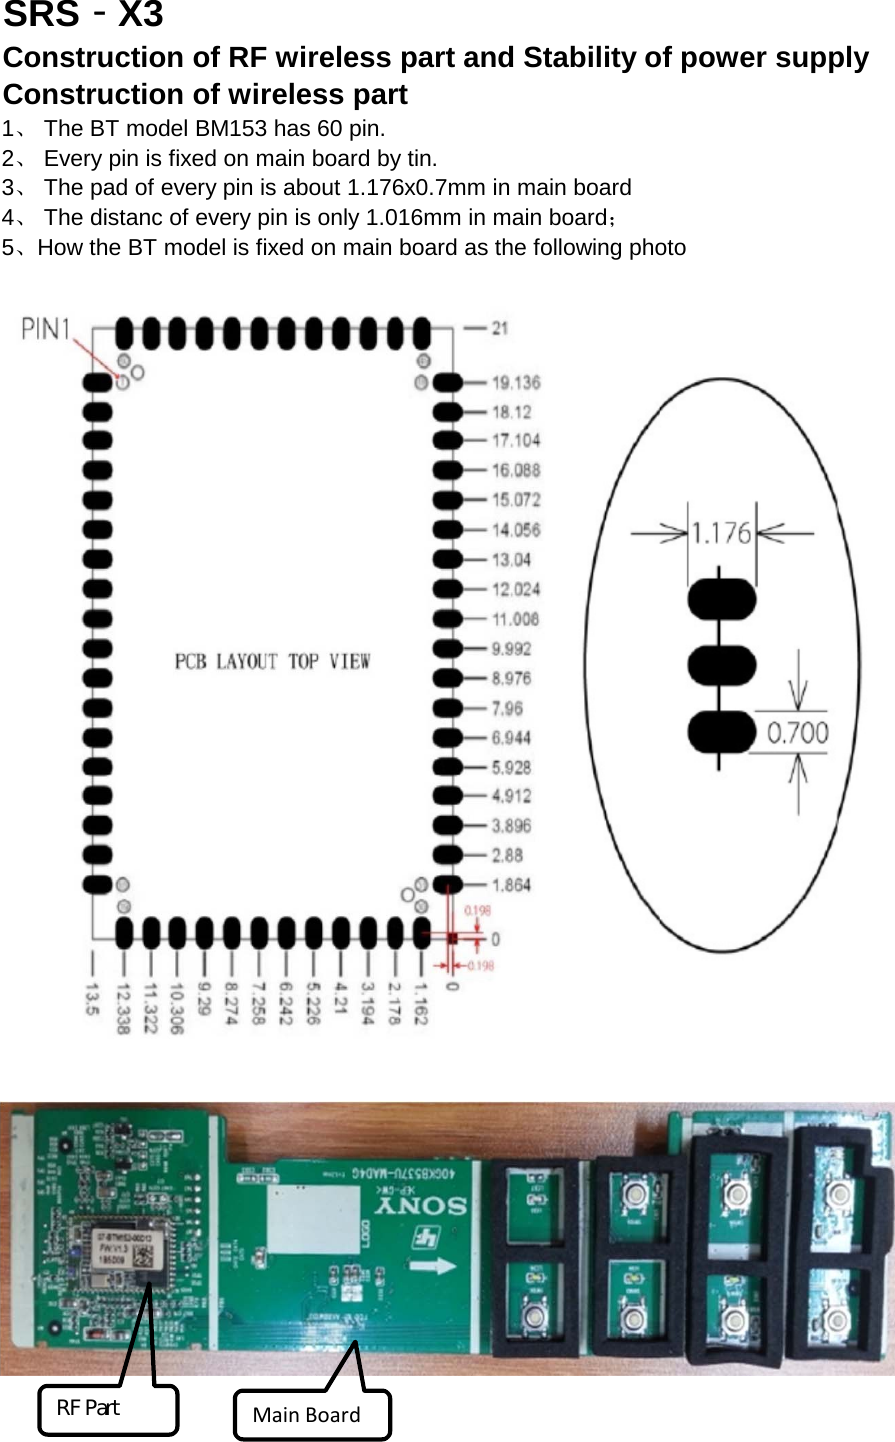 SRS‐X3Construction of RF wireless part and Stability of power supplyConstruction of wireless part1、 The BT model BM153 has 60 pin.2、 Every pin is fixed on main board by tin.3、 The pad of every pin is about 1.176x0.7mm in main board4、 The distanc of every pin is only 1.016mm in main board；5、How the BT model is fixed on main board as the following photoMainBoardRF Part